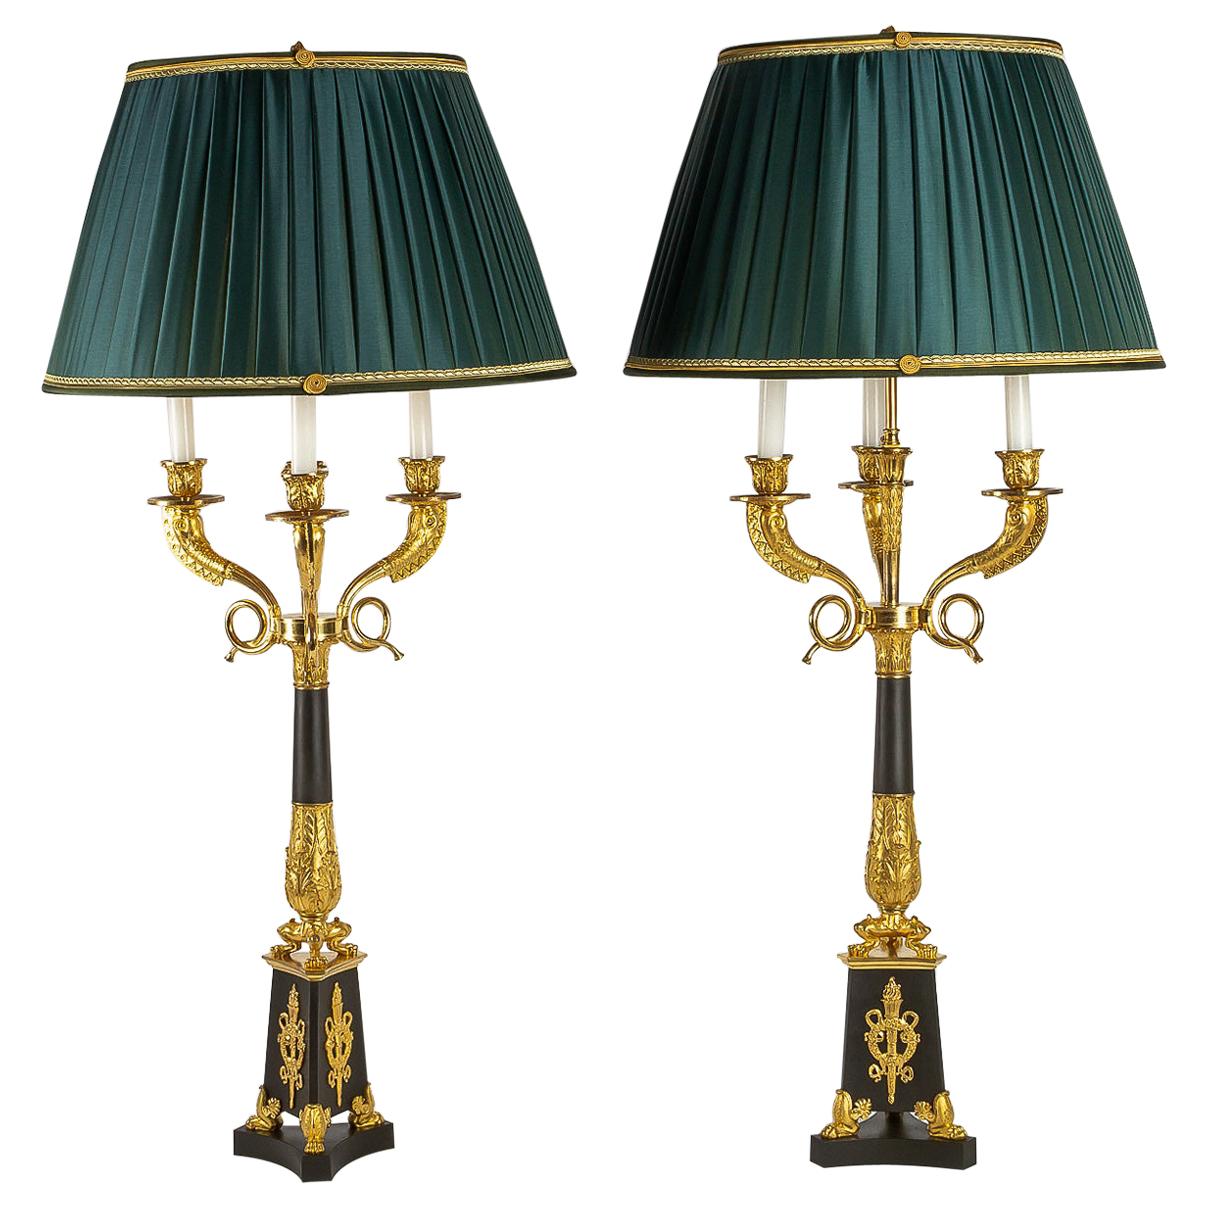 Large Pair of French Restauration Period Candelabras Converted in Table Lamps